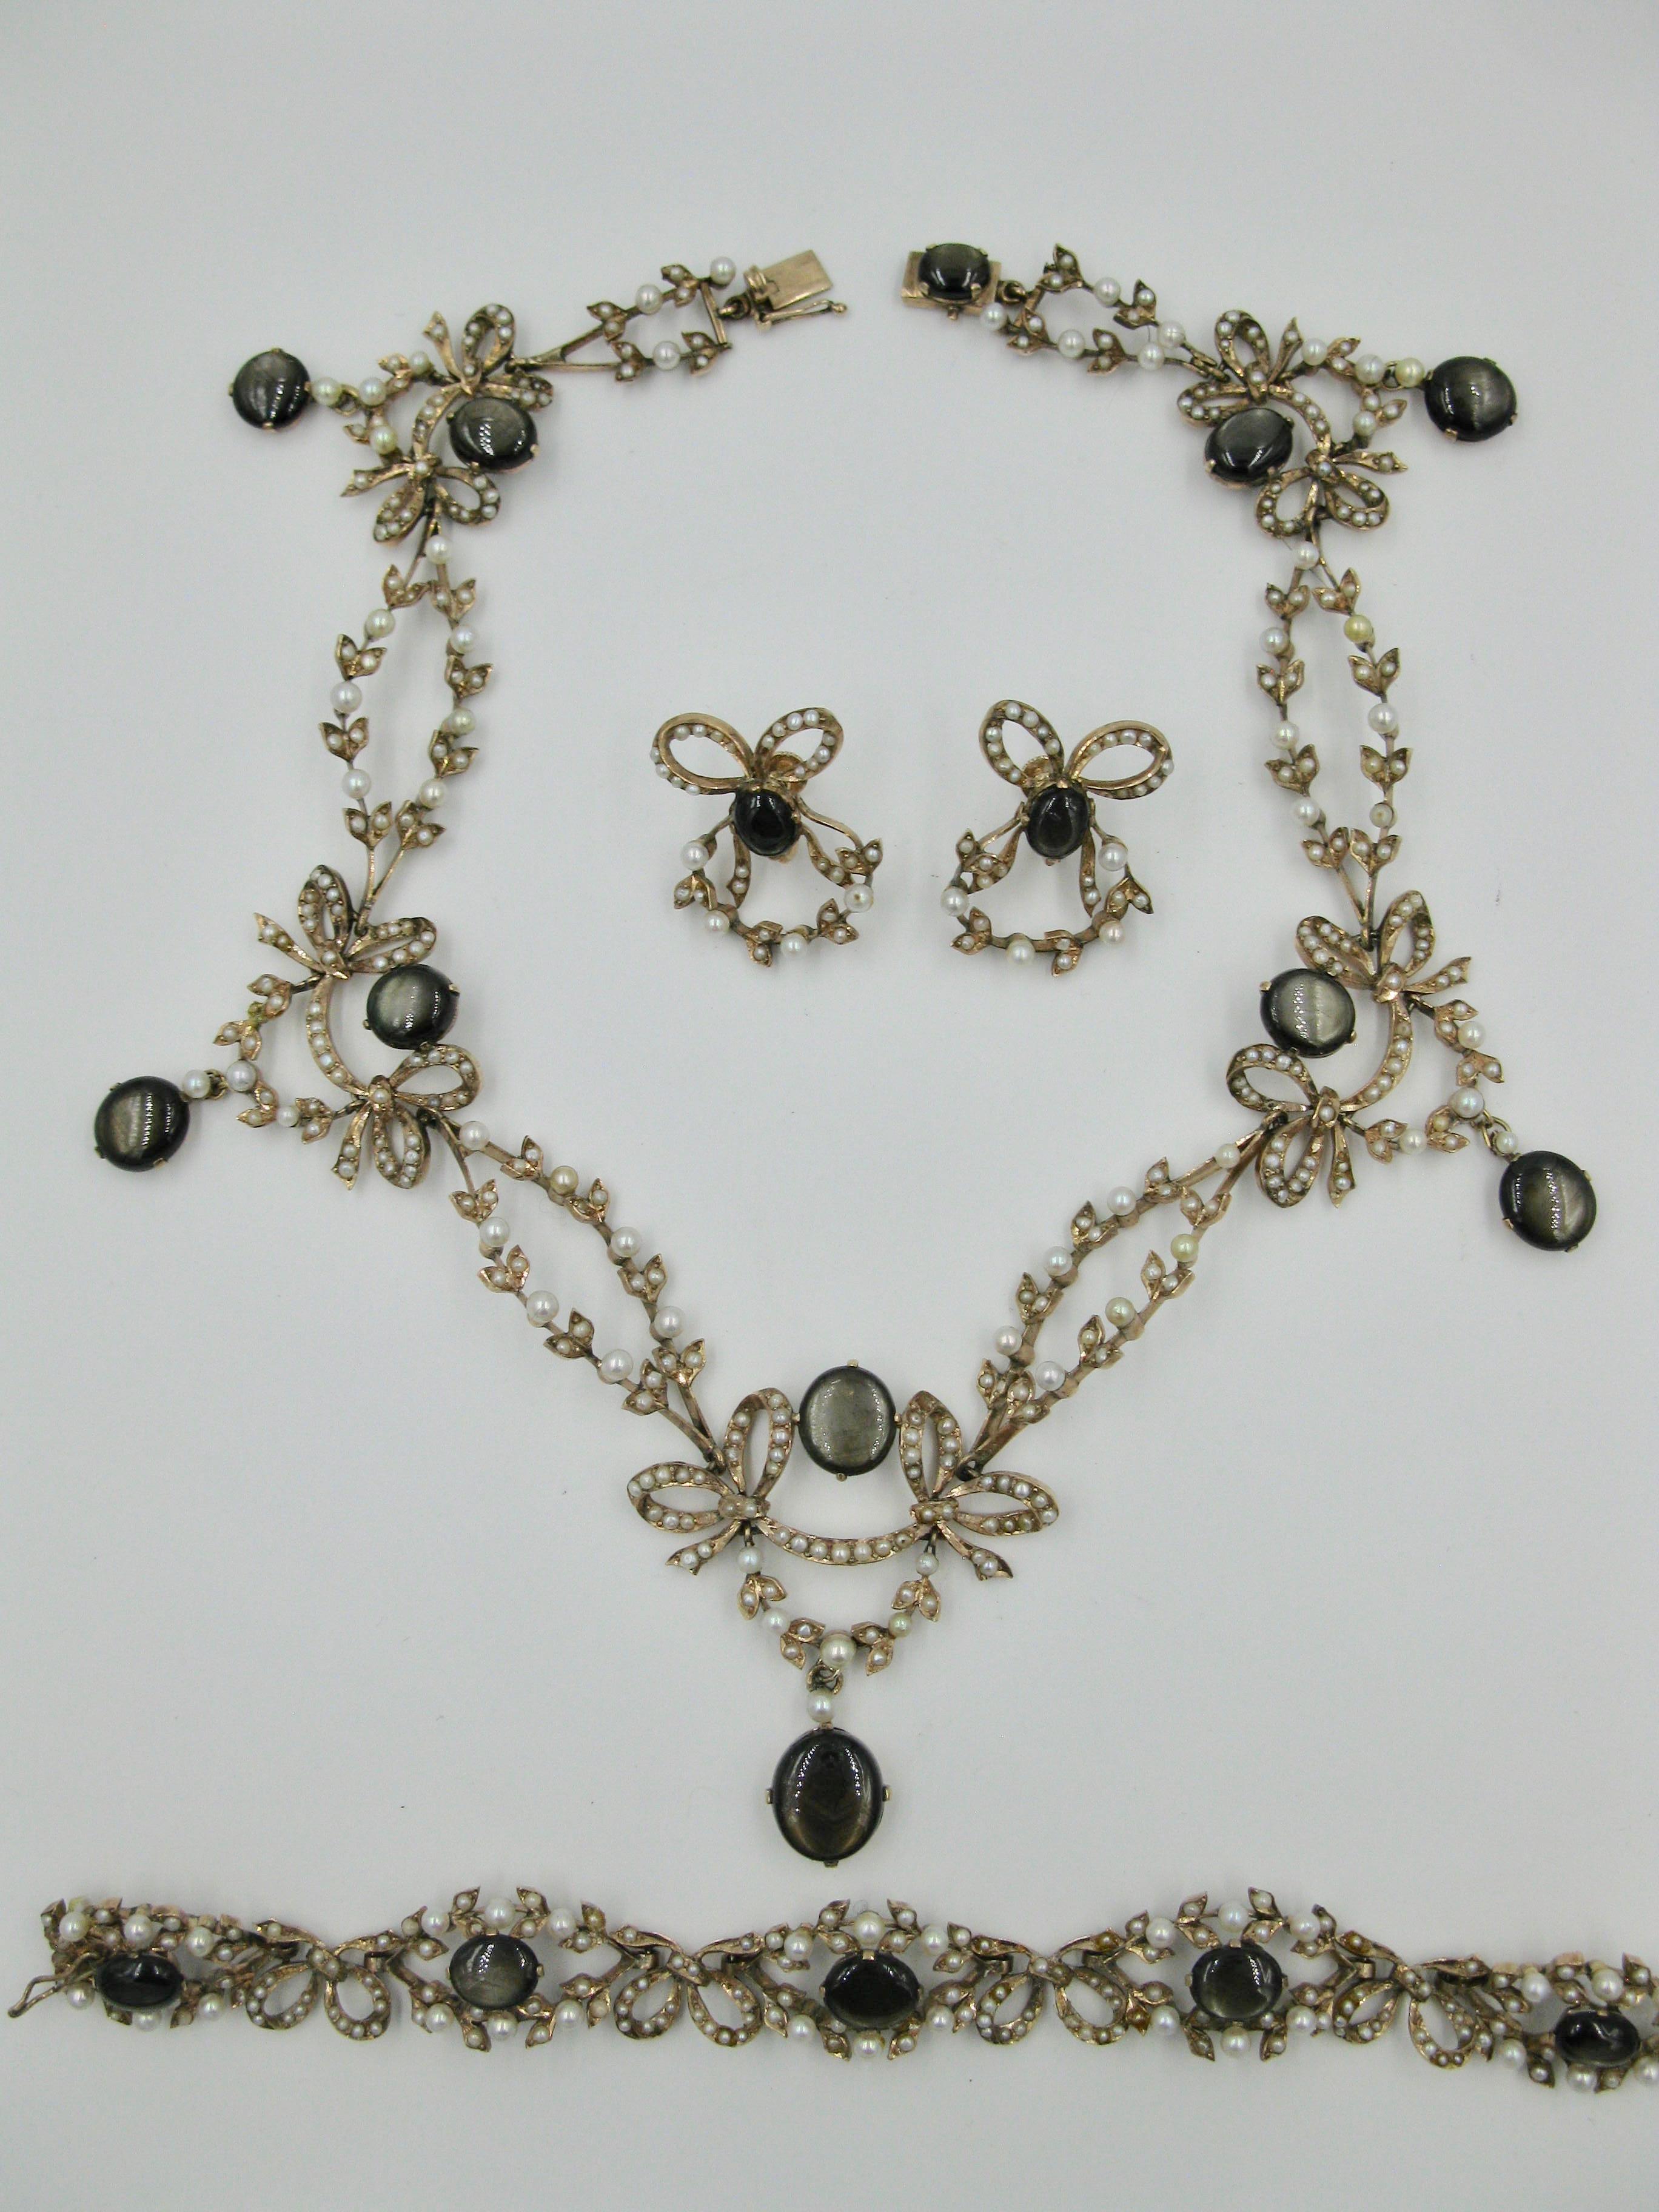 This is a spectacular museum quality antique Edwardian 43 Carat Black Star Sapphire and Seed Pearl Garland Suite.   The suite comprising a necklace, bracelet and earrings each with black star sapphires, which total approximately 43 Carat total